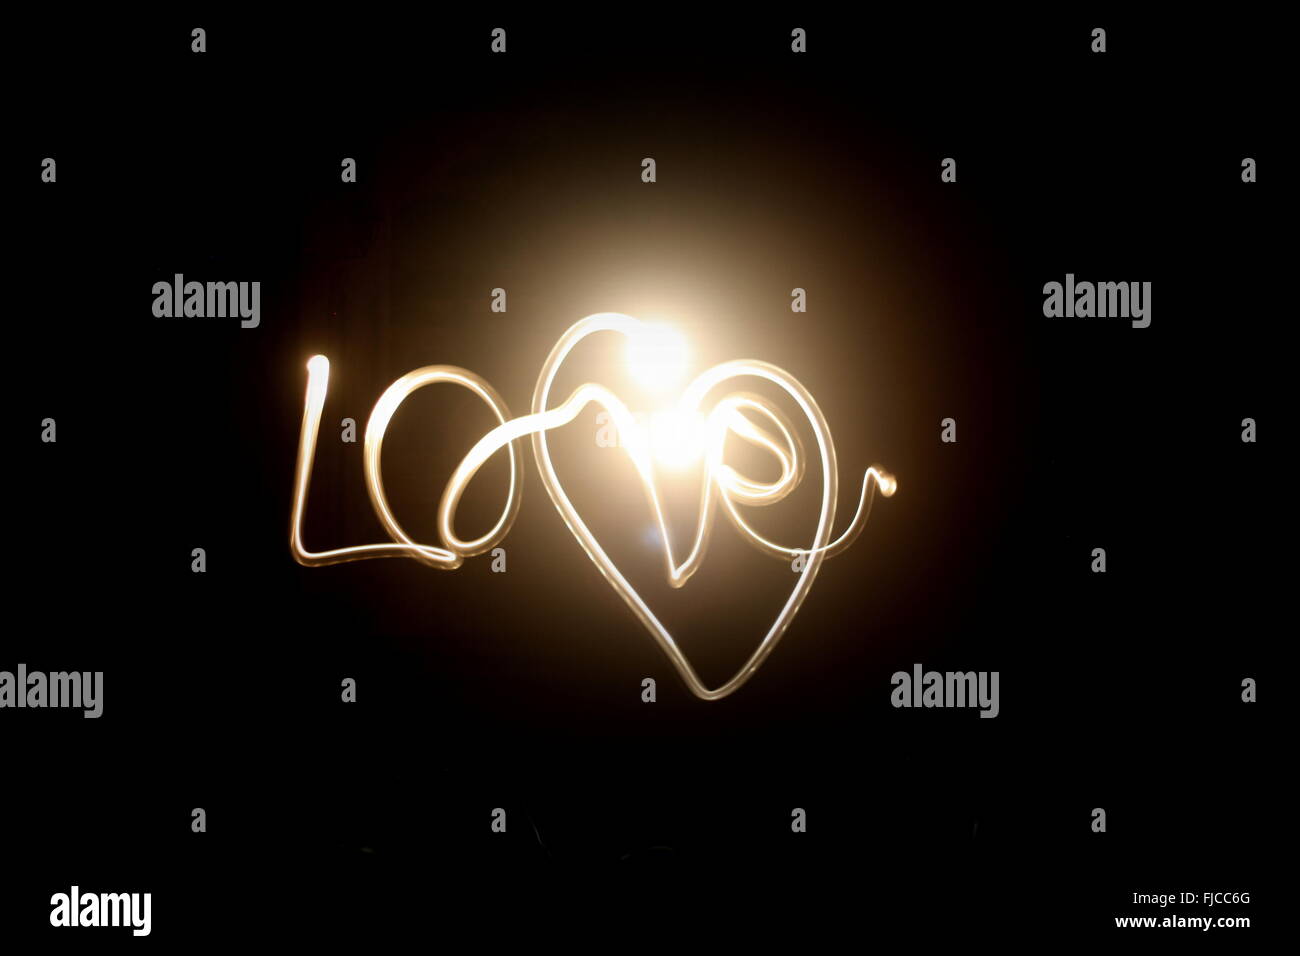 The word 'Love' with a heart around it. Stock Photo